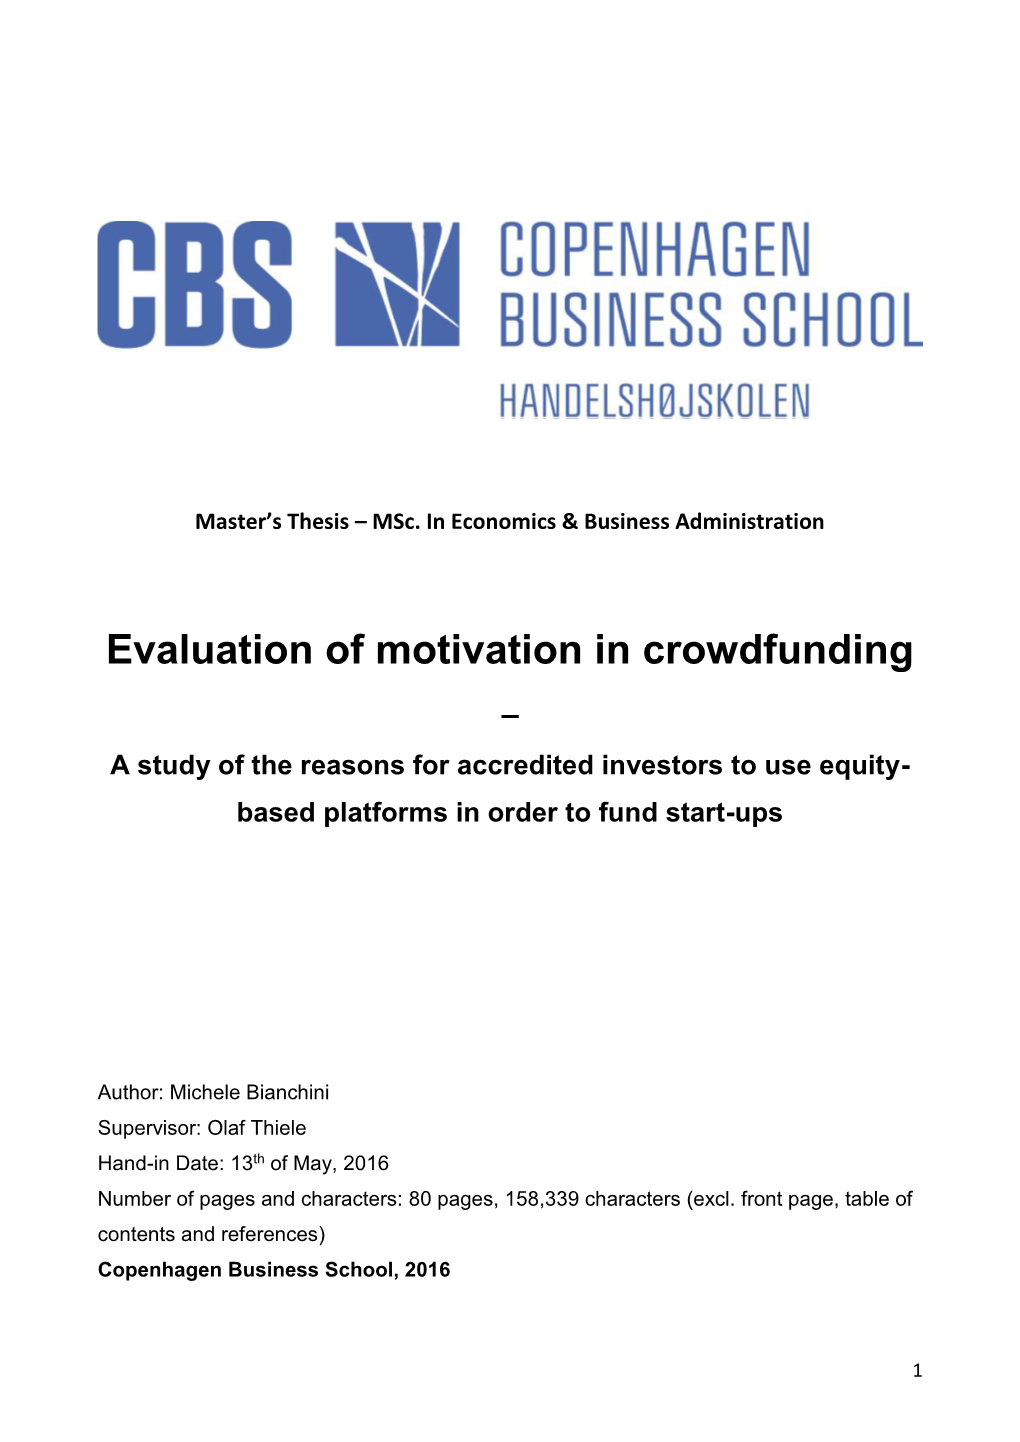 Evaluation of Motivation in Crowdfunding – a Study of the Reasons for Accredited Investors to Use Equity- Based Platforms in Order to Fund Start-Ups